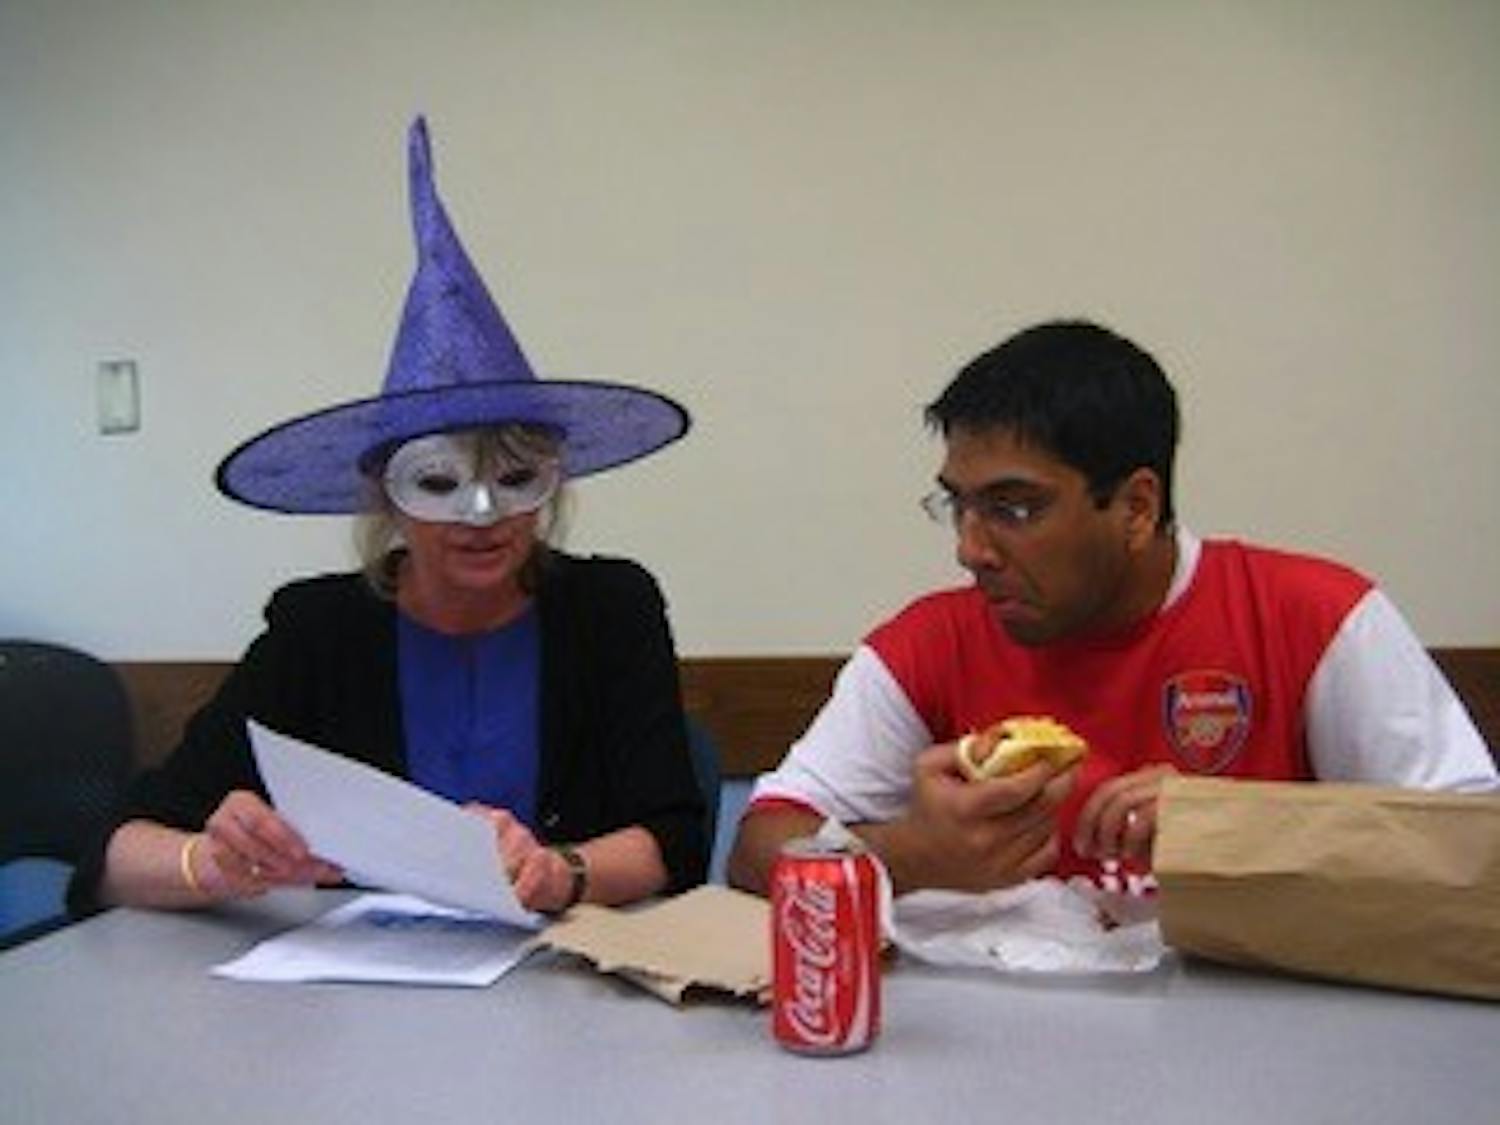 Melissa Malouf loved this photo "because the student is so engaged despite [her] costume and his mouthful of food."&nbsp;